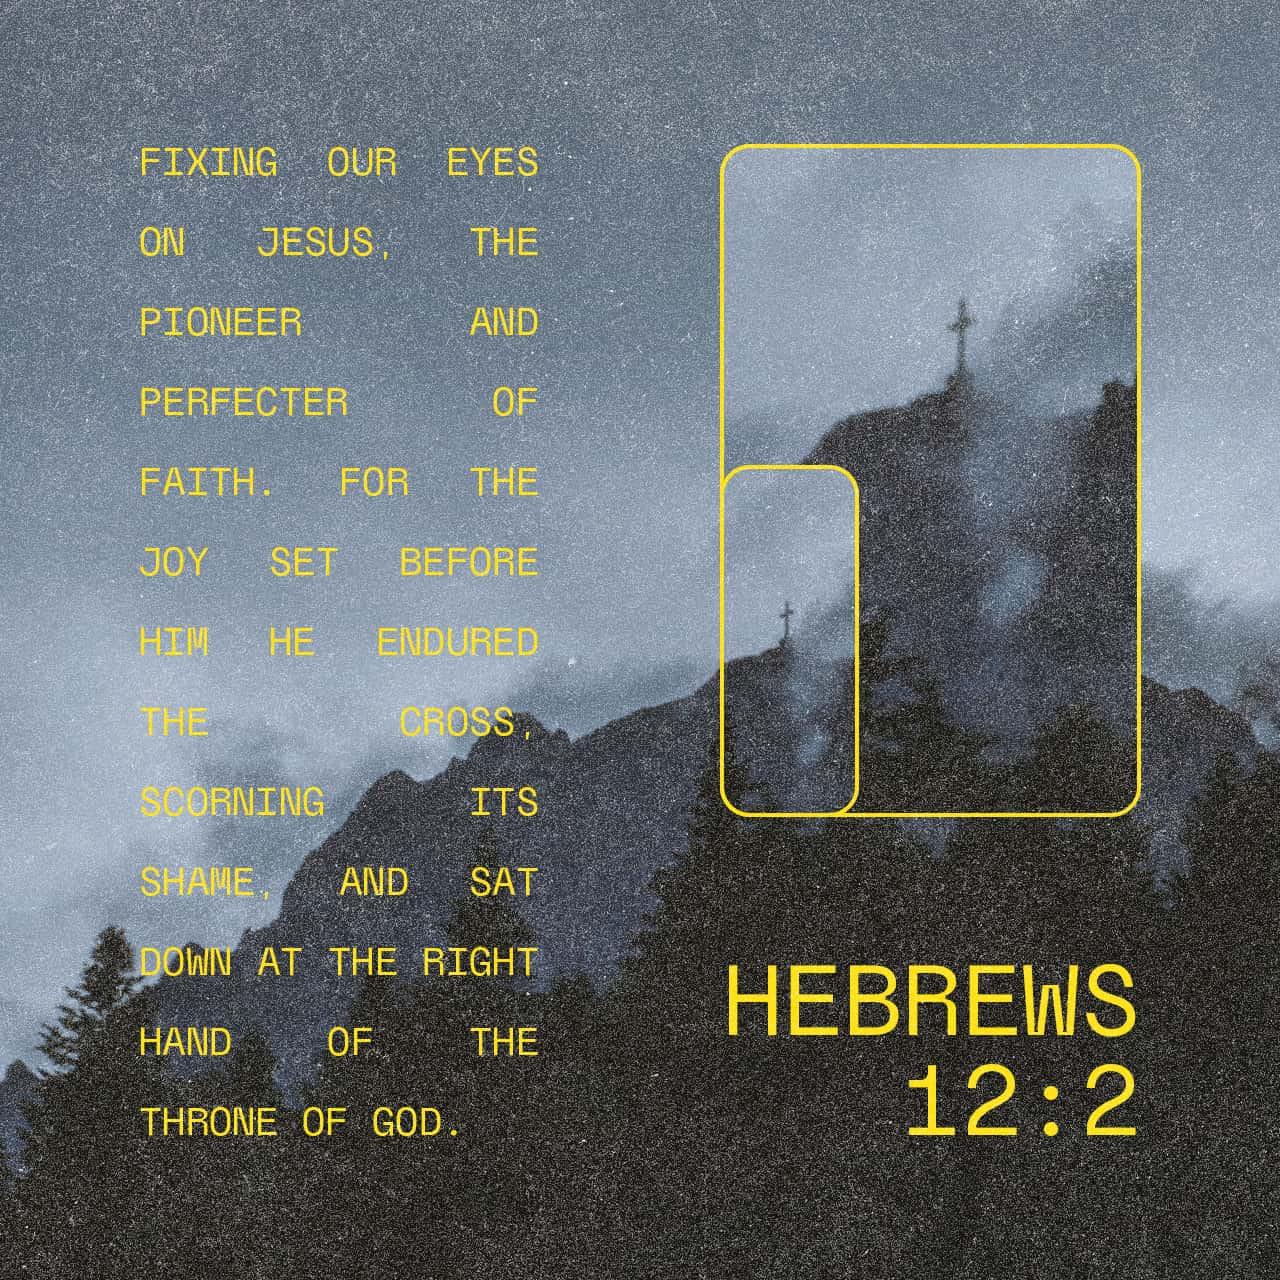 Bible Verse of the Day - day 89 - image 56520 (Hebrews 12:1-3)